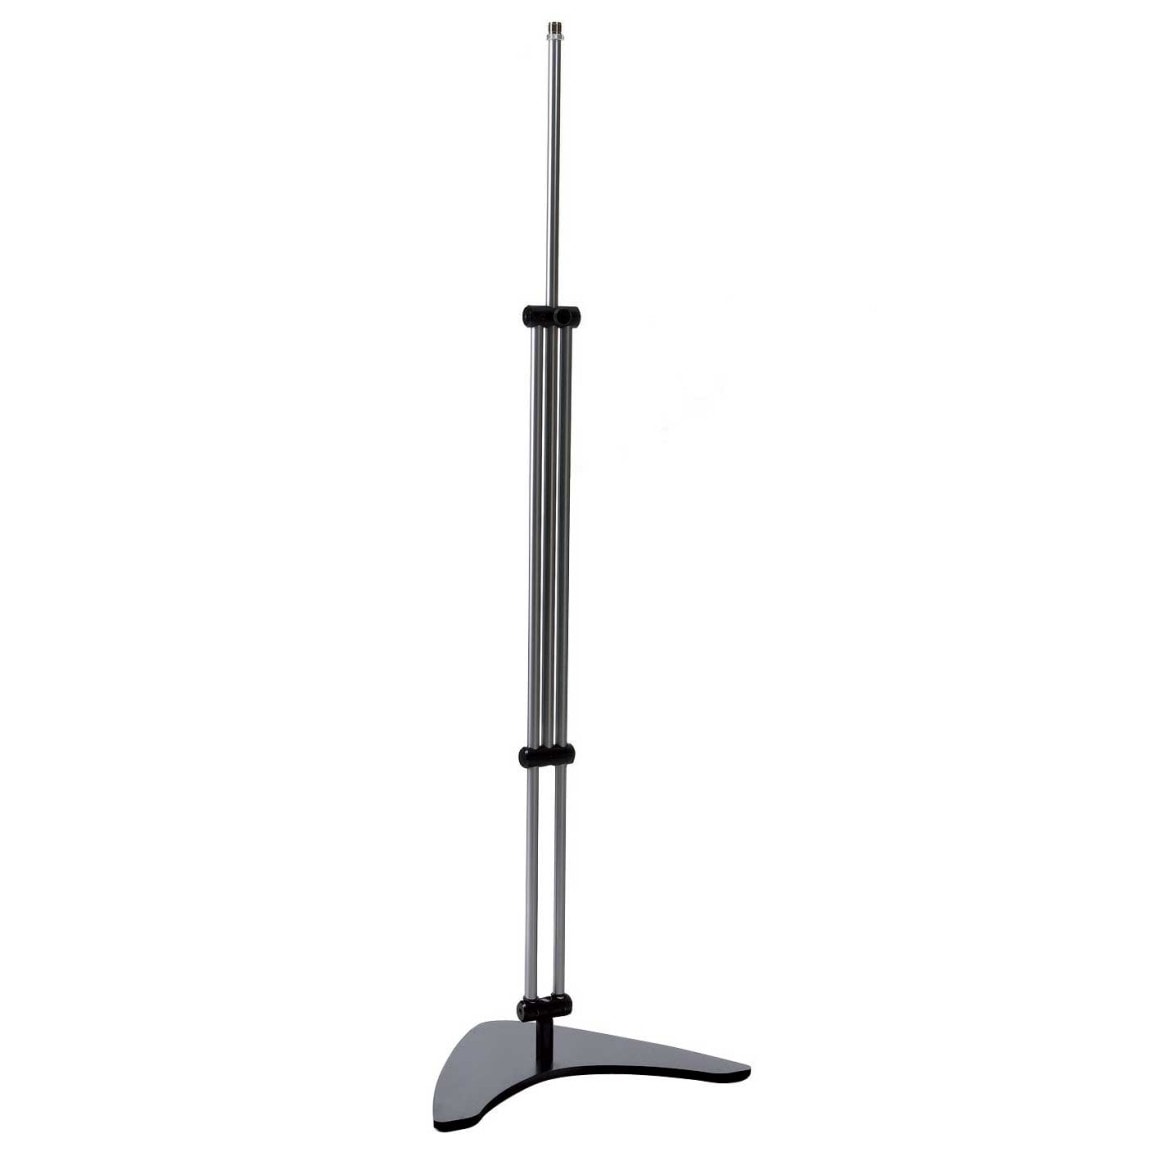 microphone-stand-stylus-10300-P